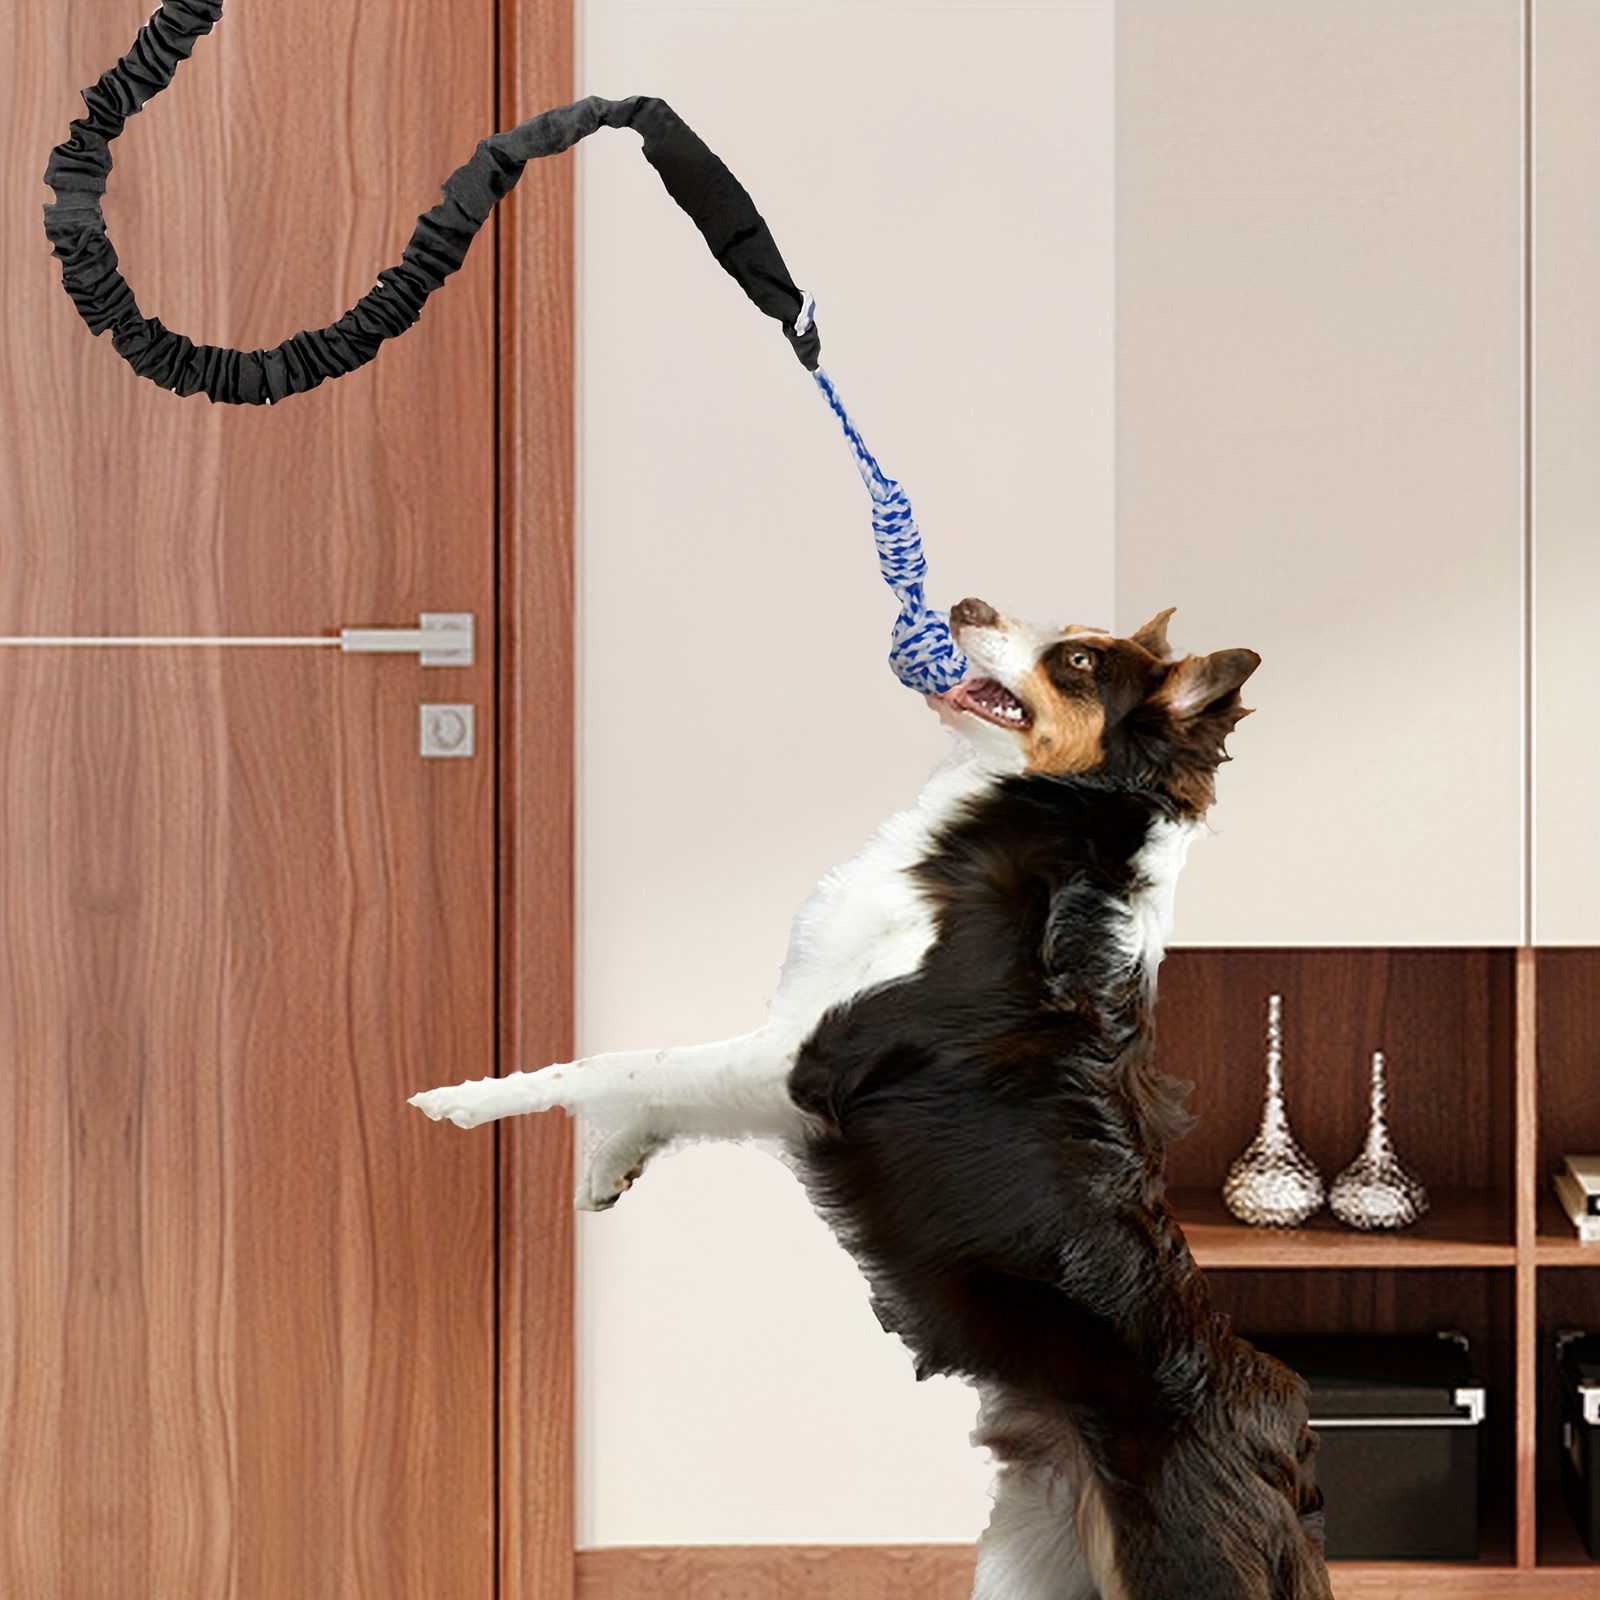 Dog Outdoor Bungee Hanging Toy